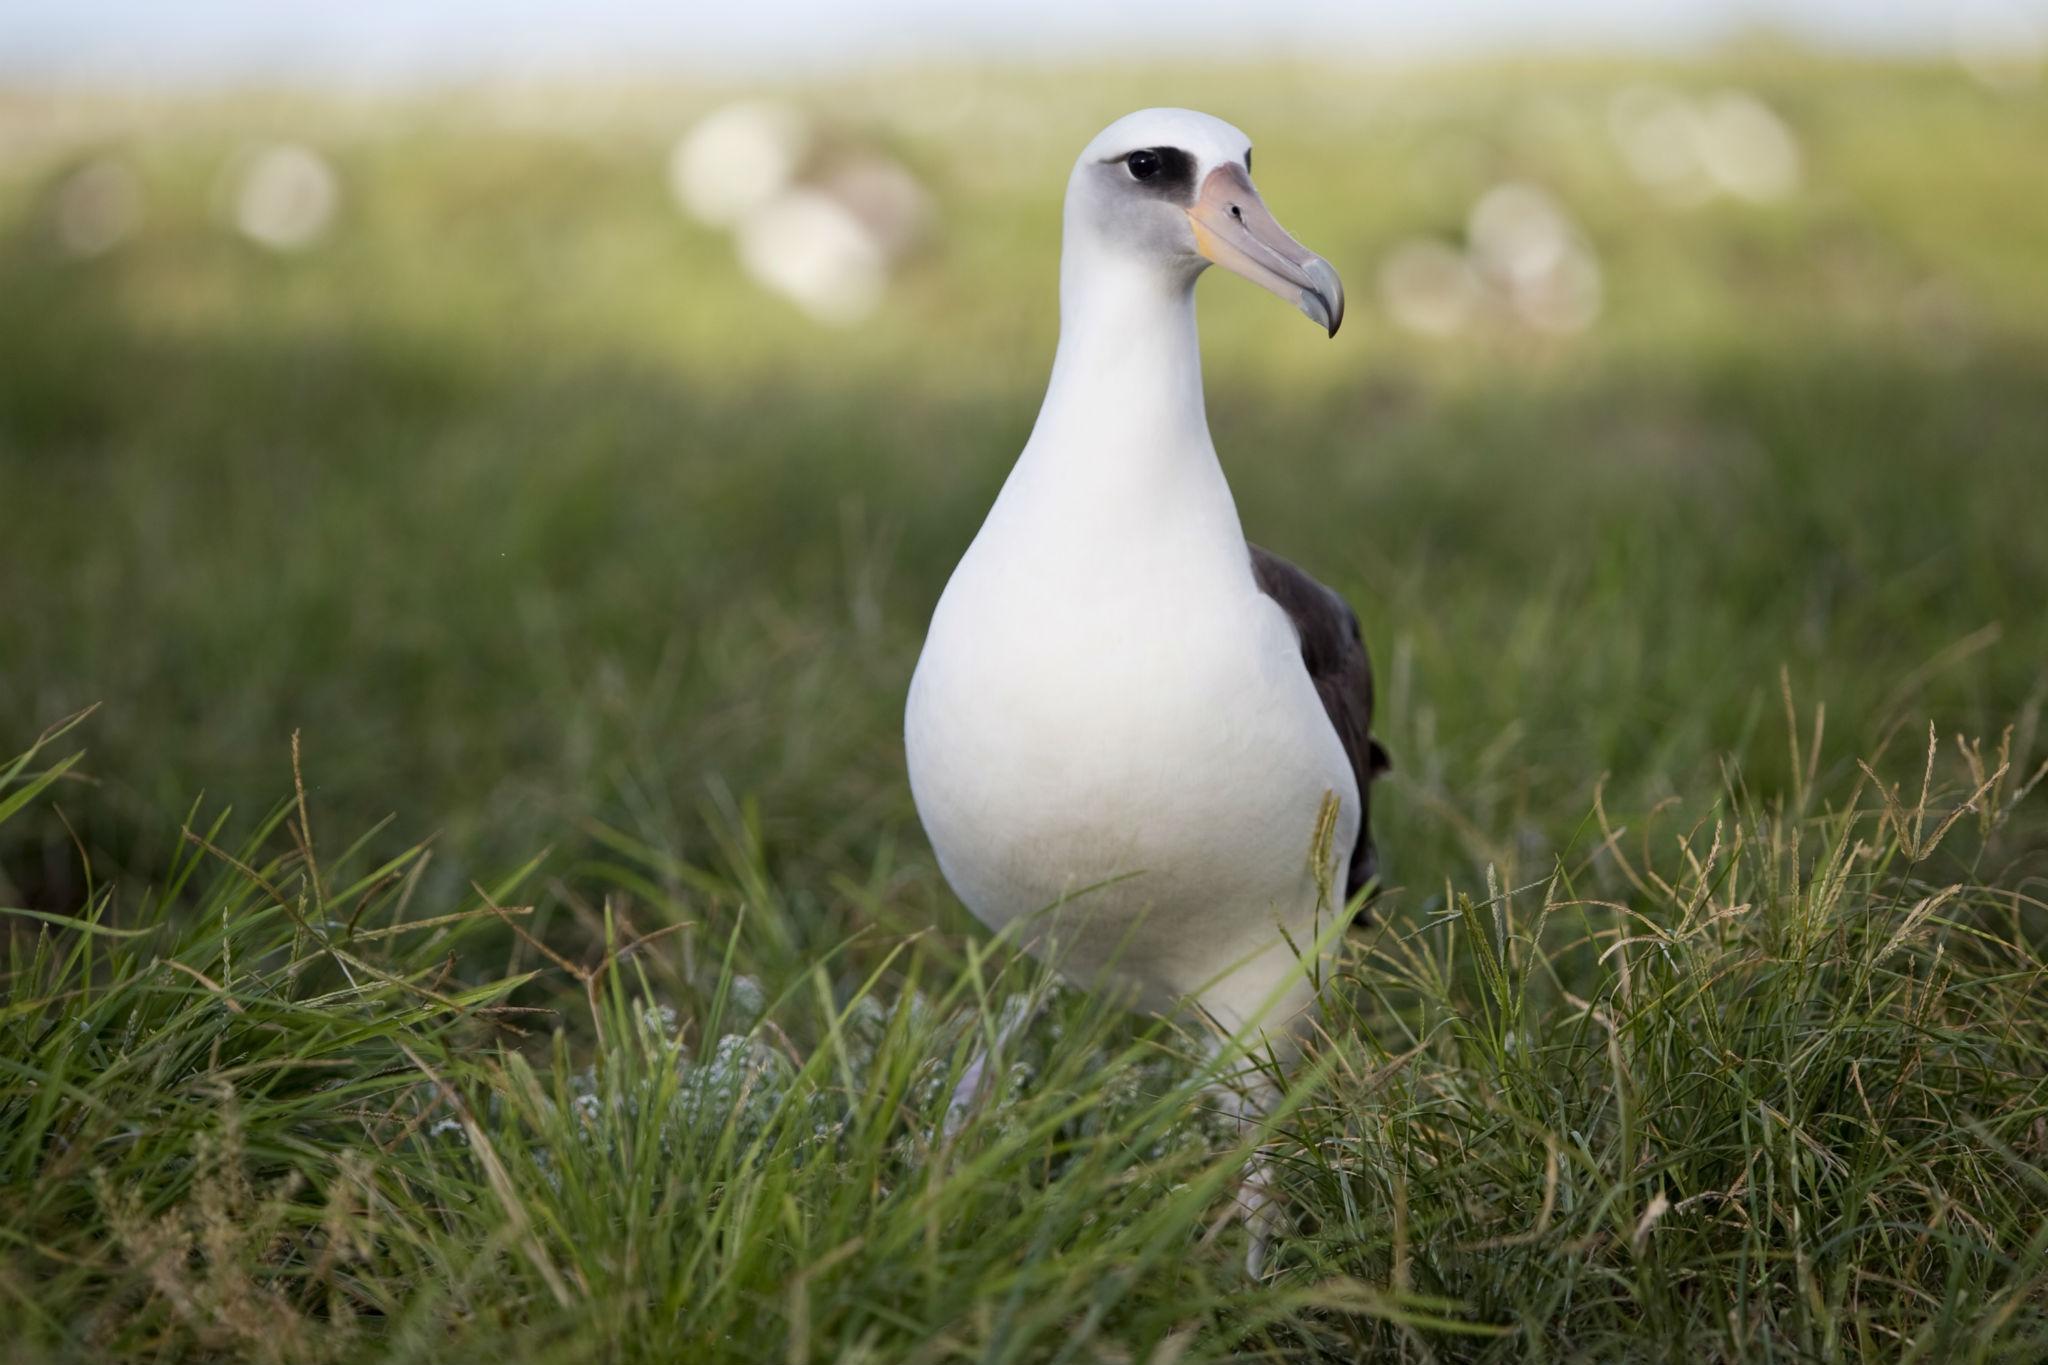 A Laysan Albatross at the Midway Atoll, which President Obama will visit next week after expanding the area's national monument